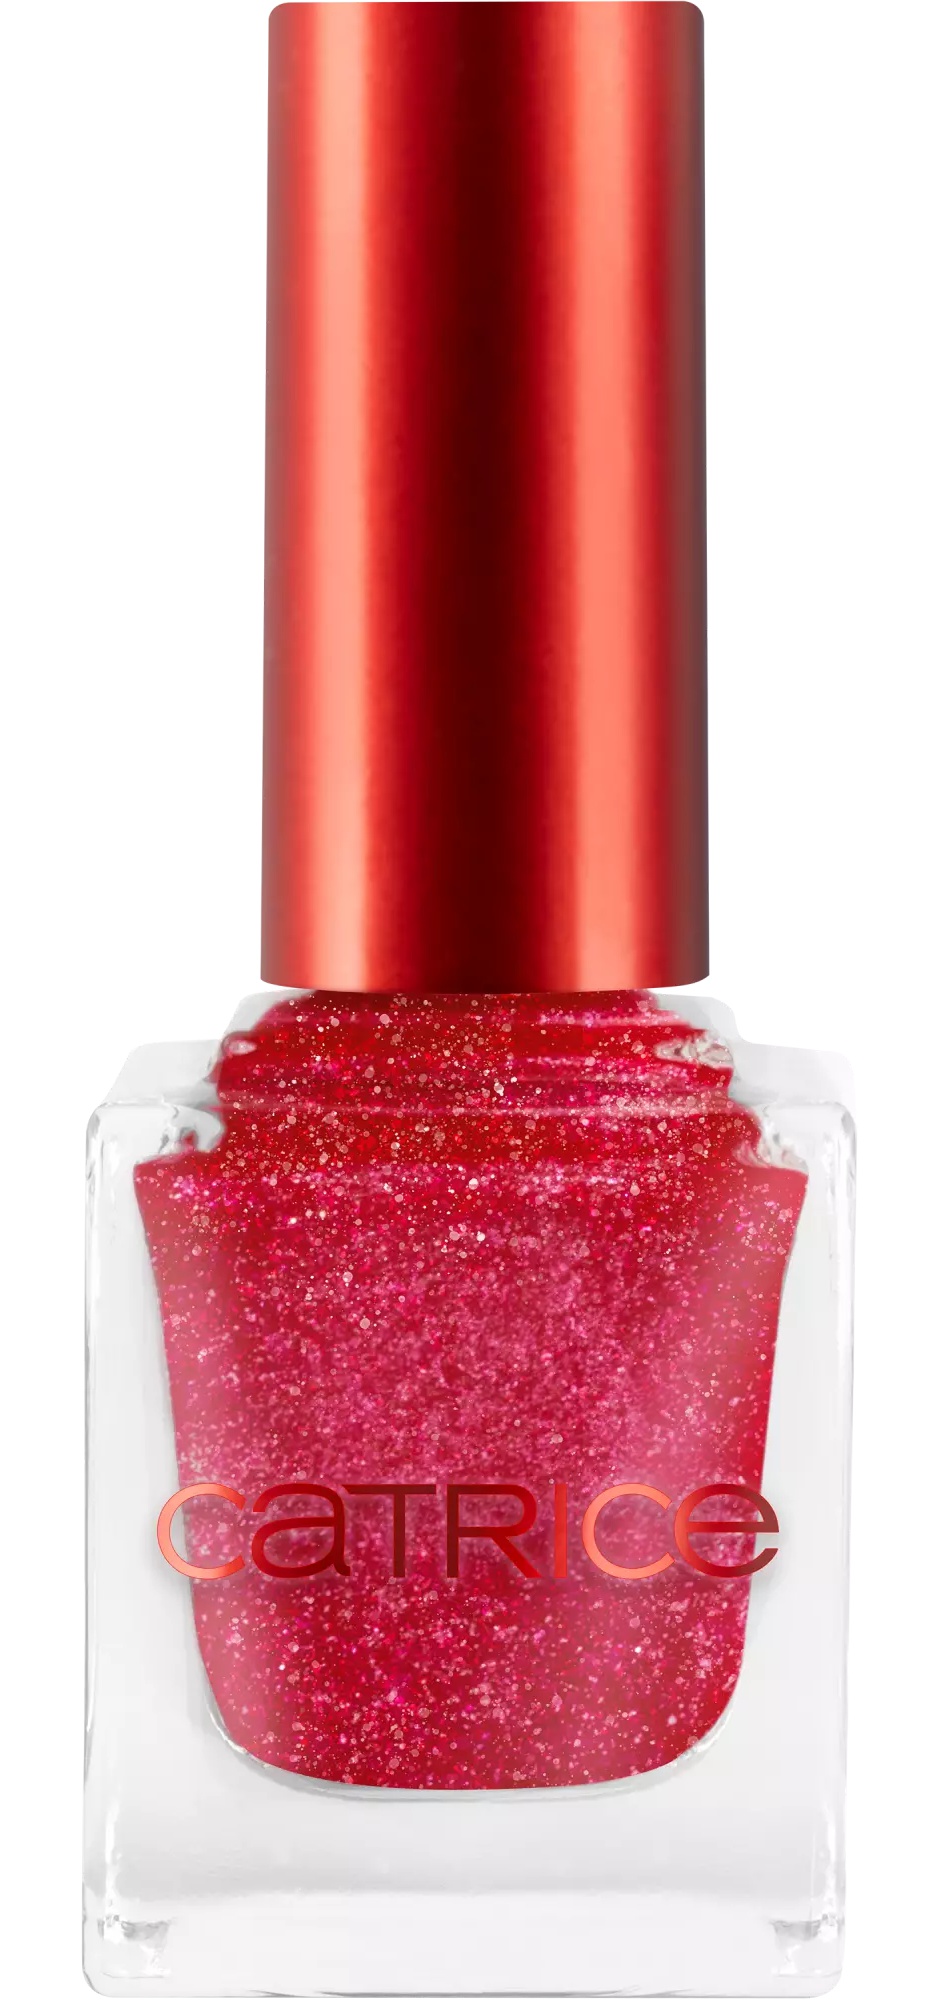 Catrice Heart Affair Nail Lacquer Love Game